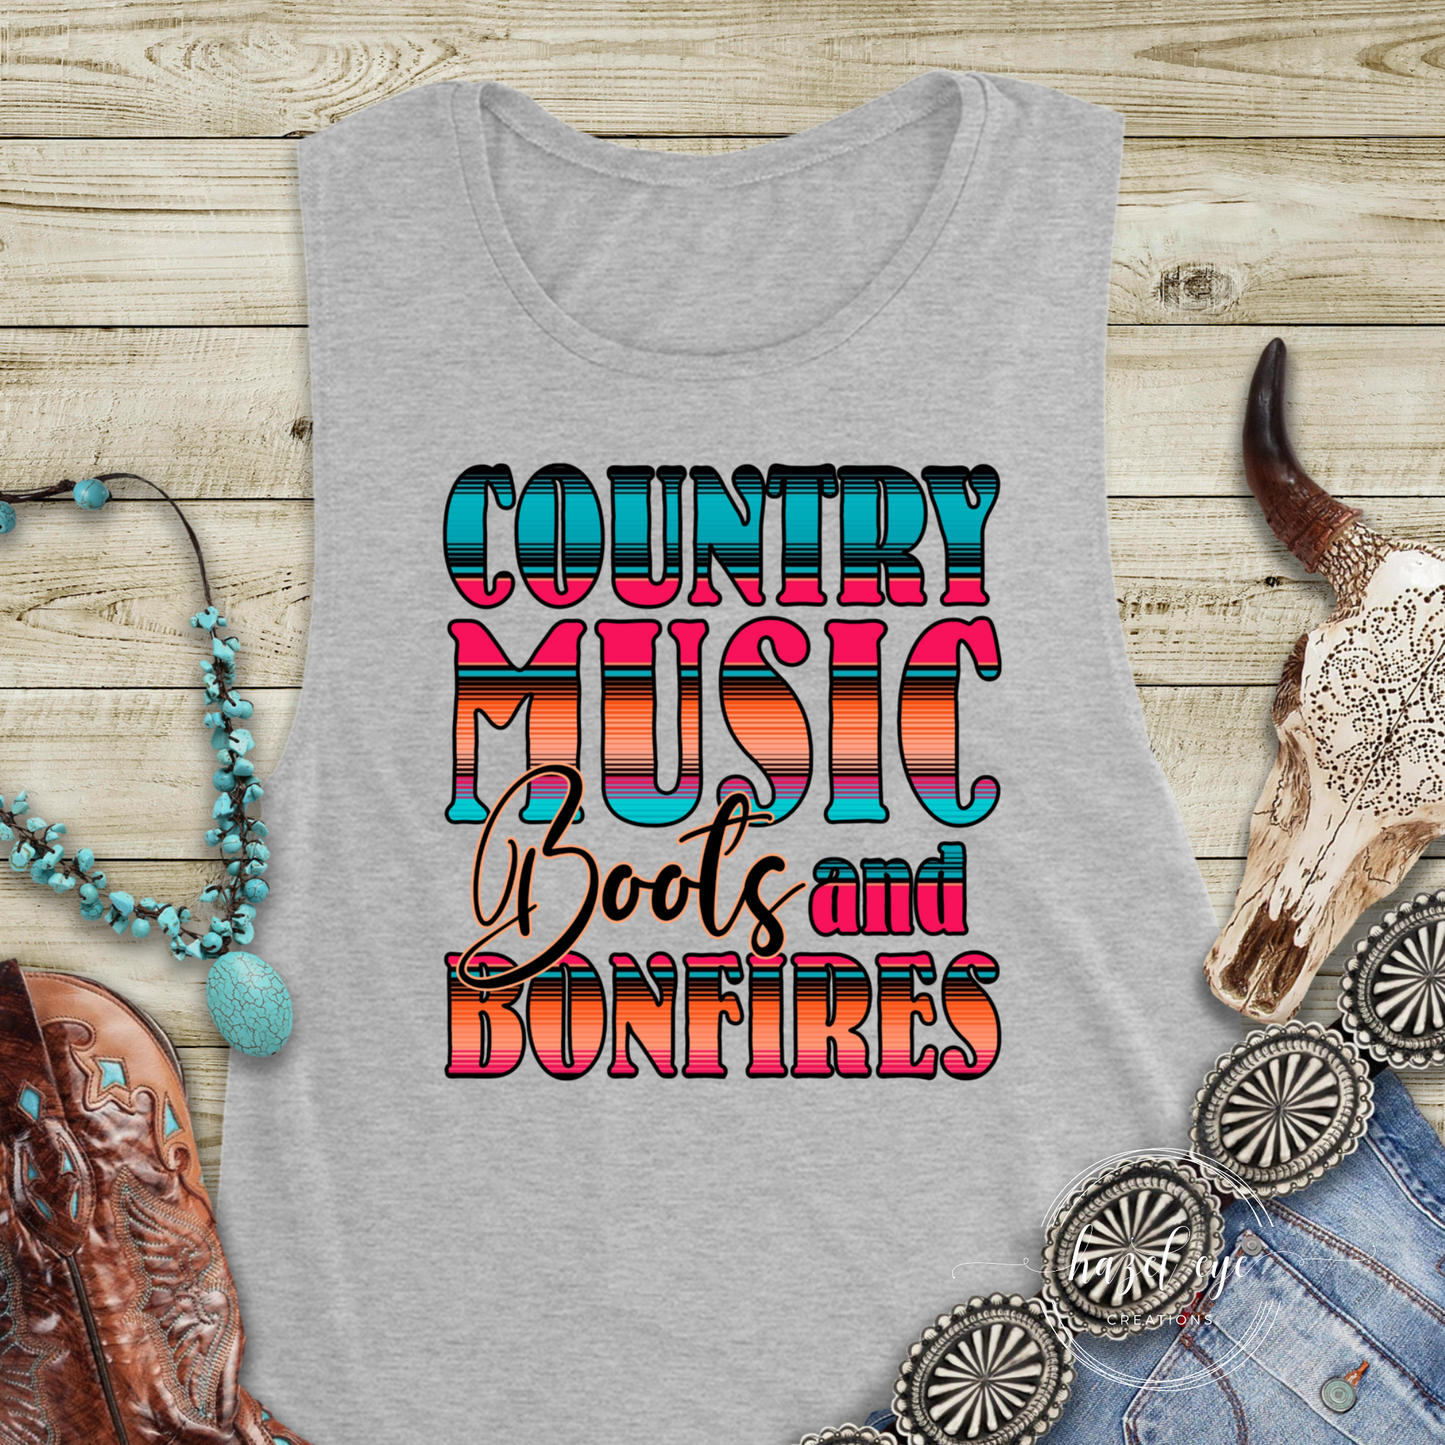 Country music boots and bonfires